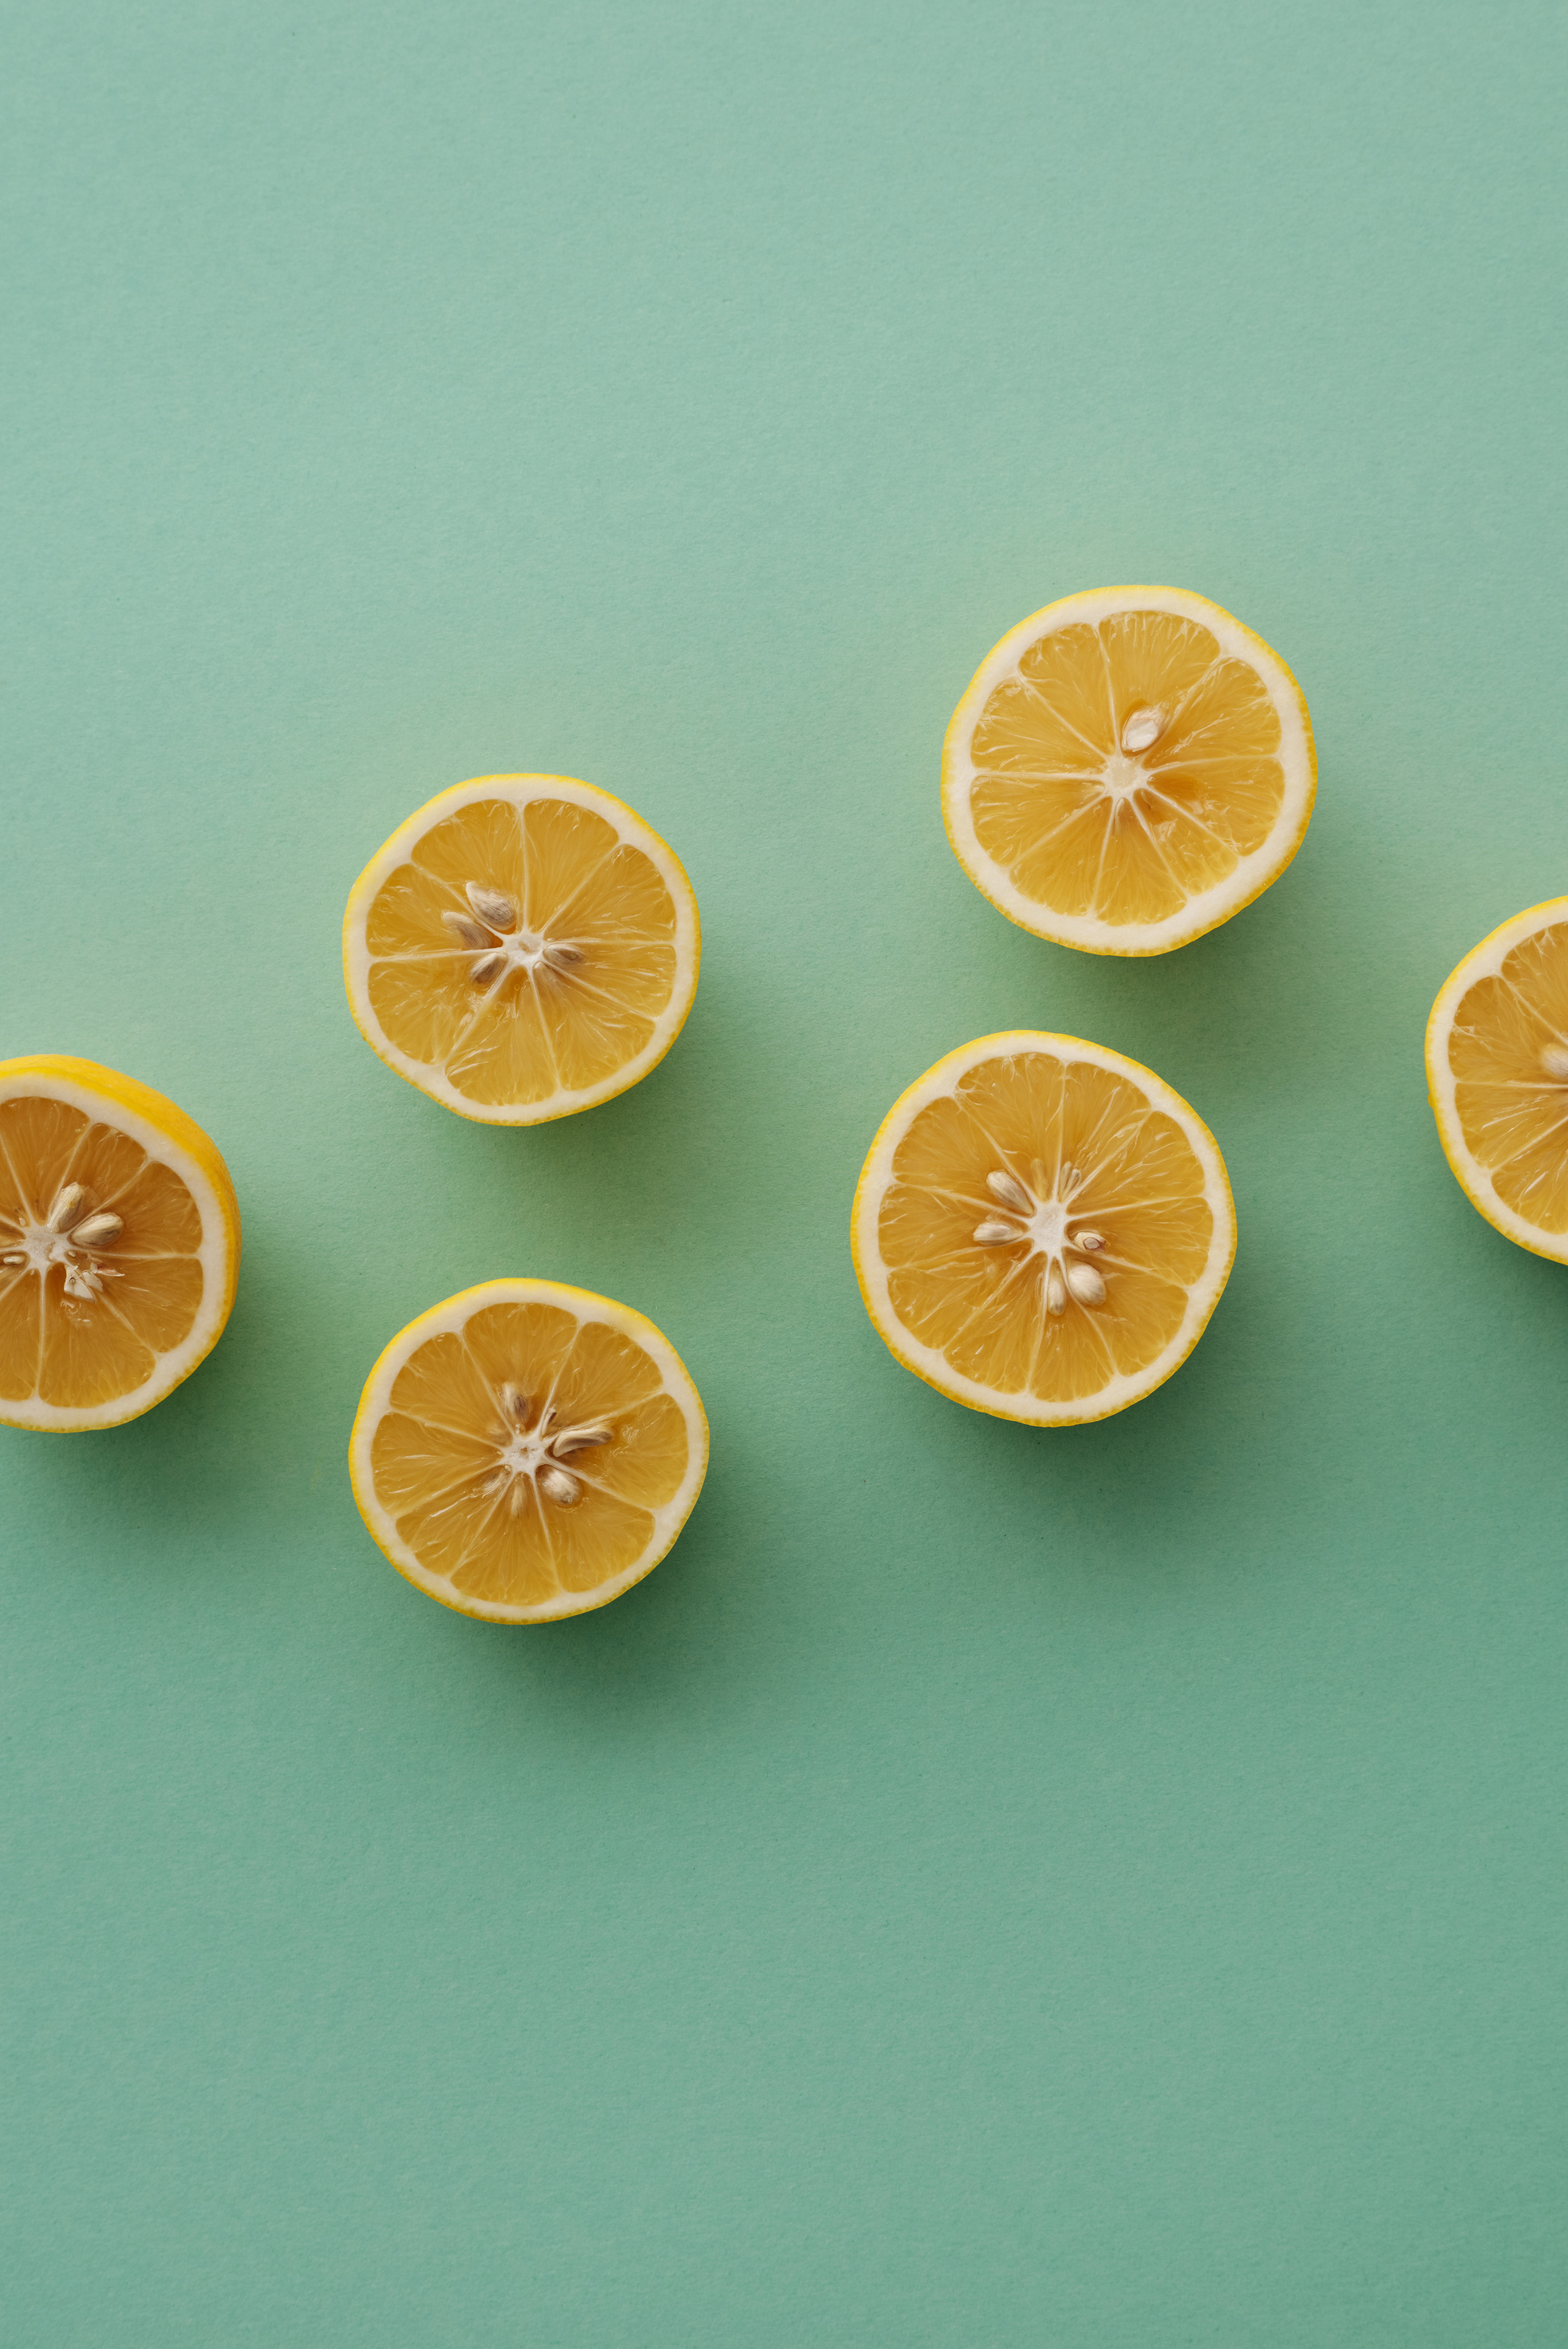 Sliced Lemons in Close Up Photography